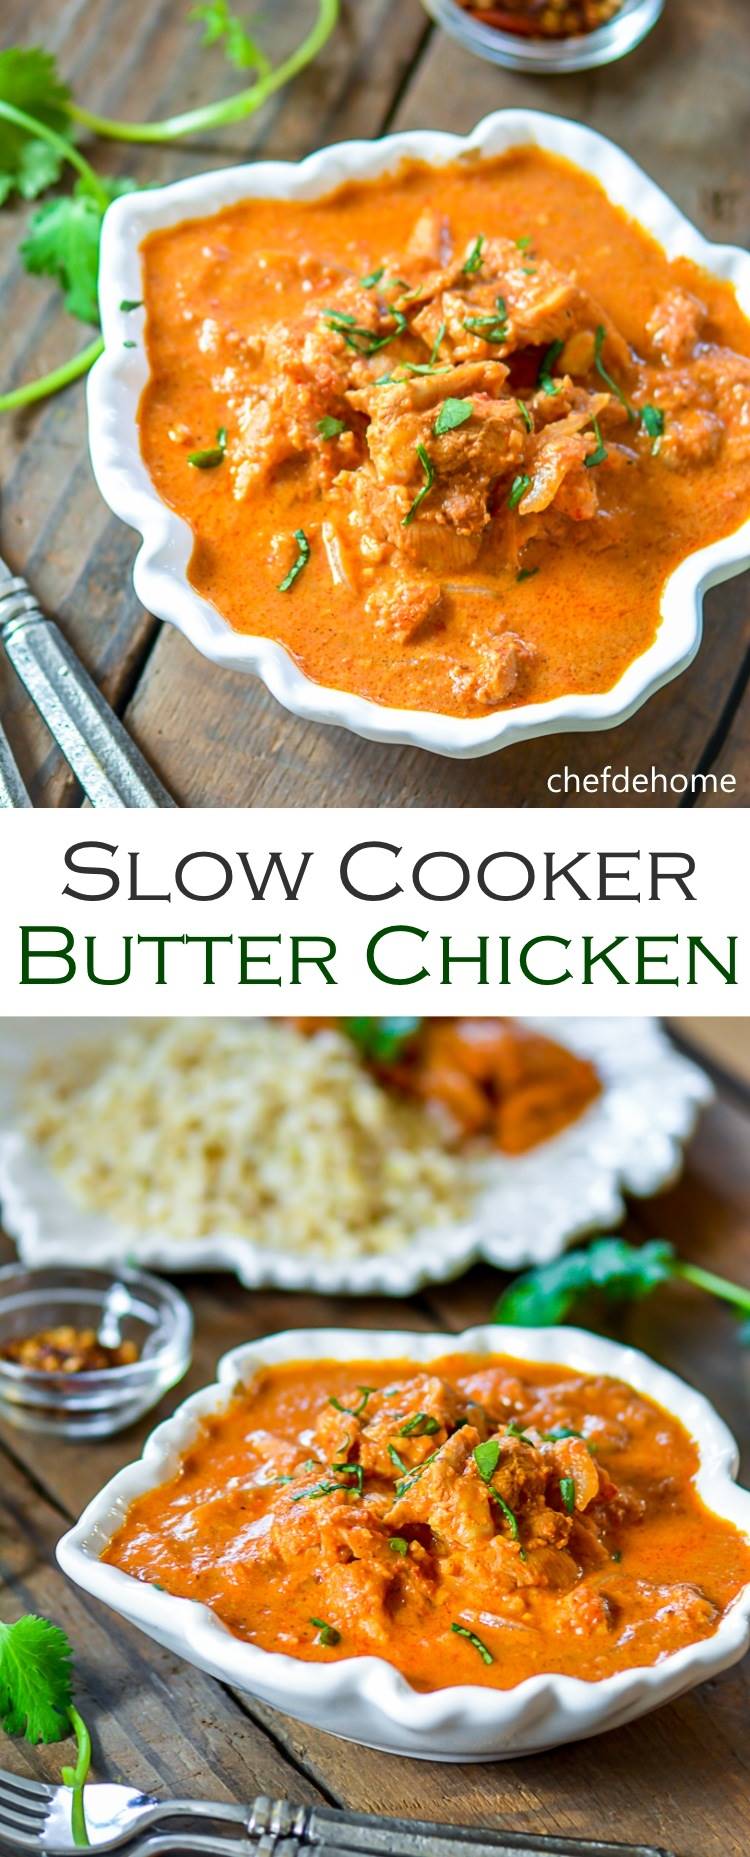 Slow Cooker Restaurant Style Butter Chicken for an Easy Homemade Indian Chicken Dinner | chefdehome.com